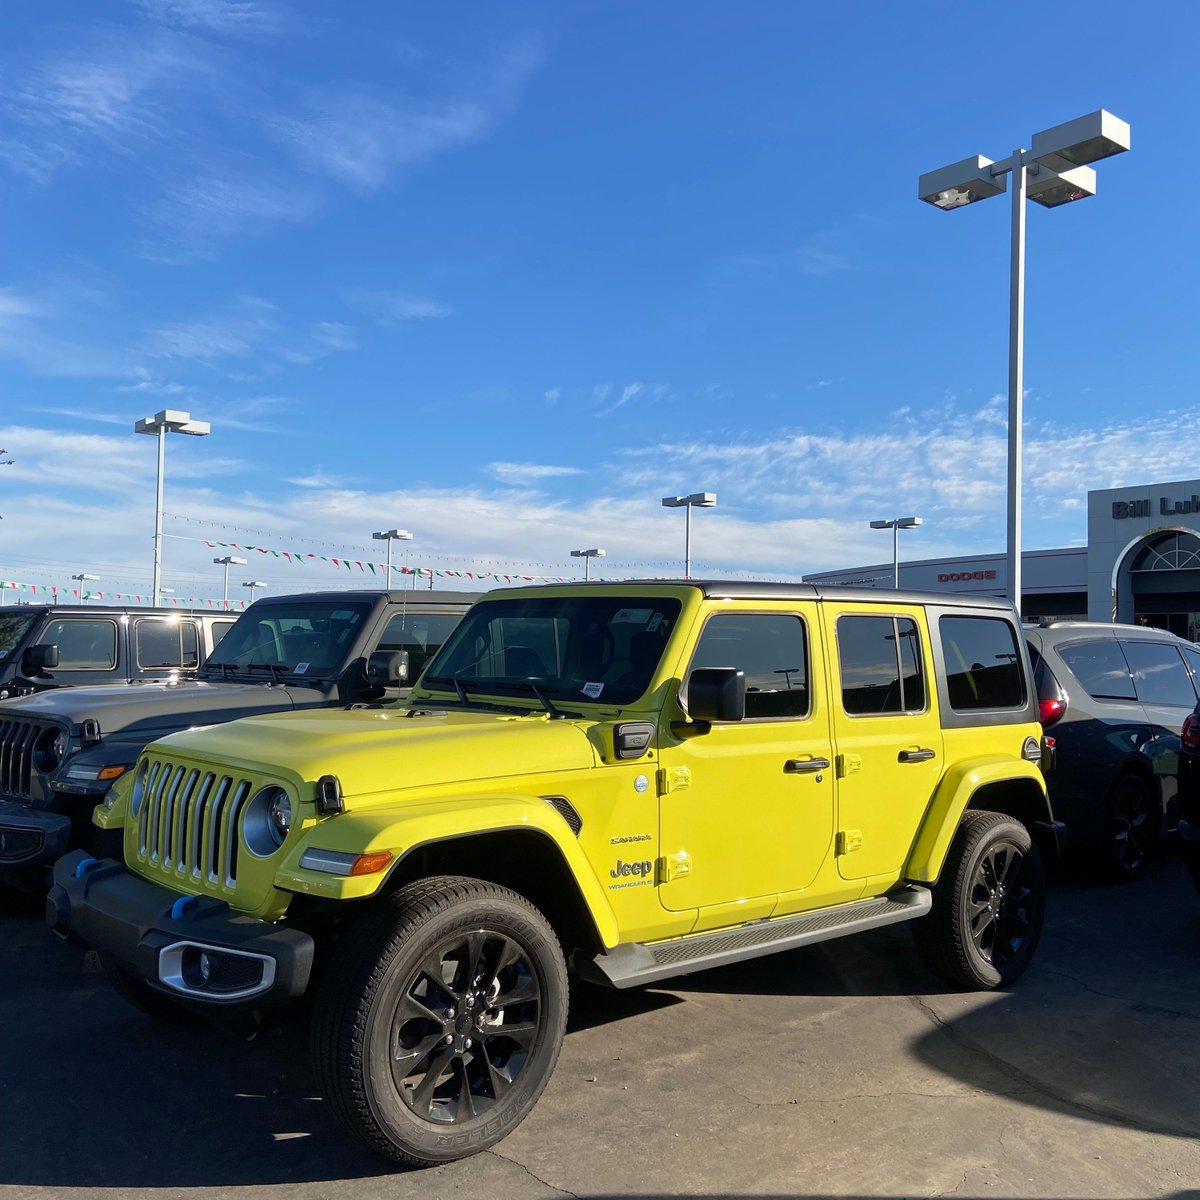 We have over 110 #JeepWranglers available! Come find your favorite color and model! 

#billluke #wranglersahara #wrangler #jeepforsale